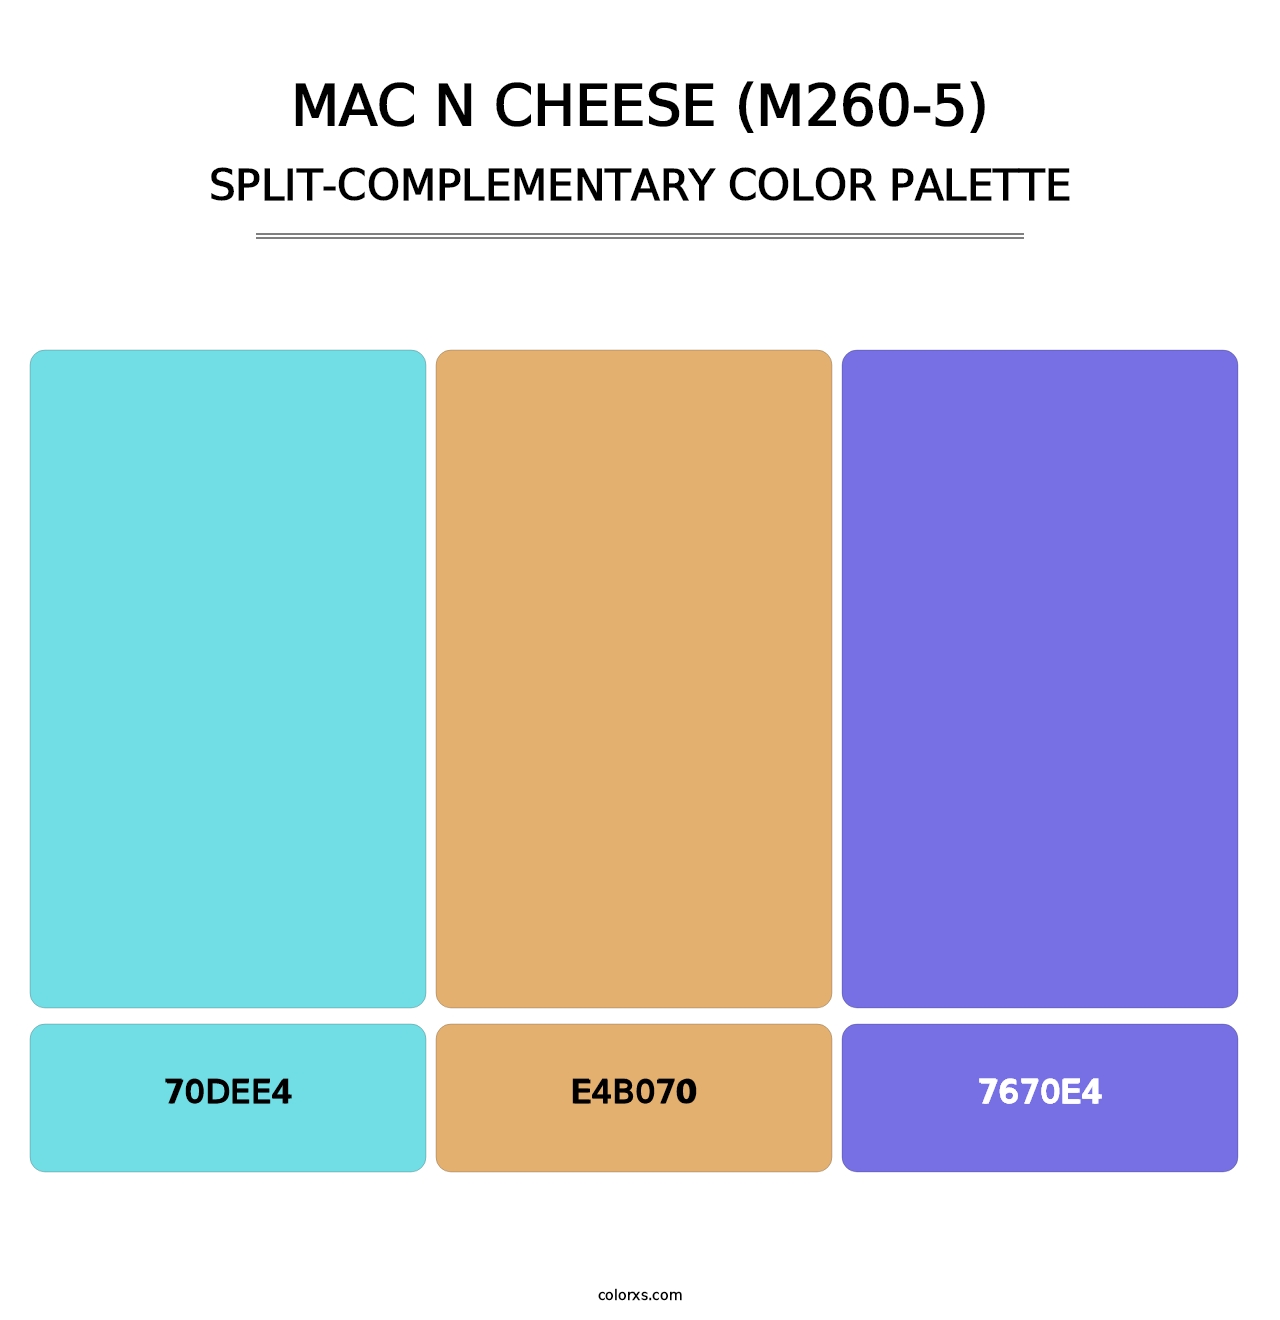 Mac N Cheese (M260-5) - Split-Complementary Color Palette